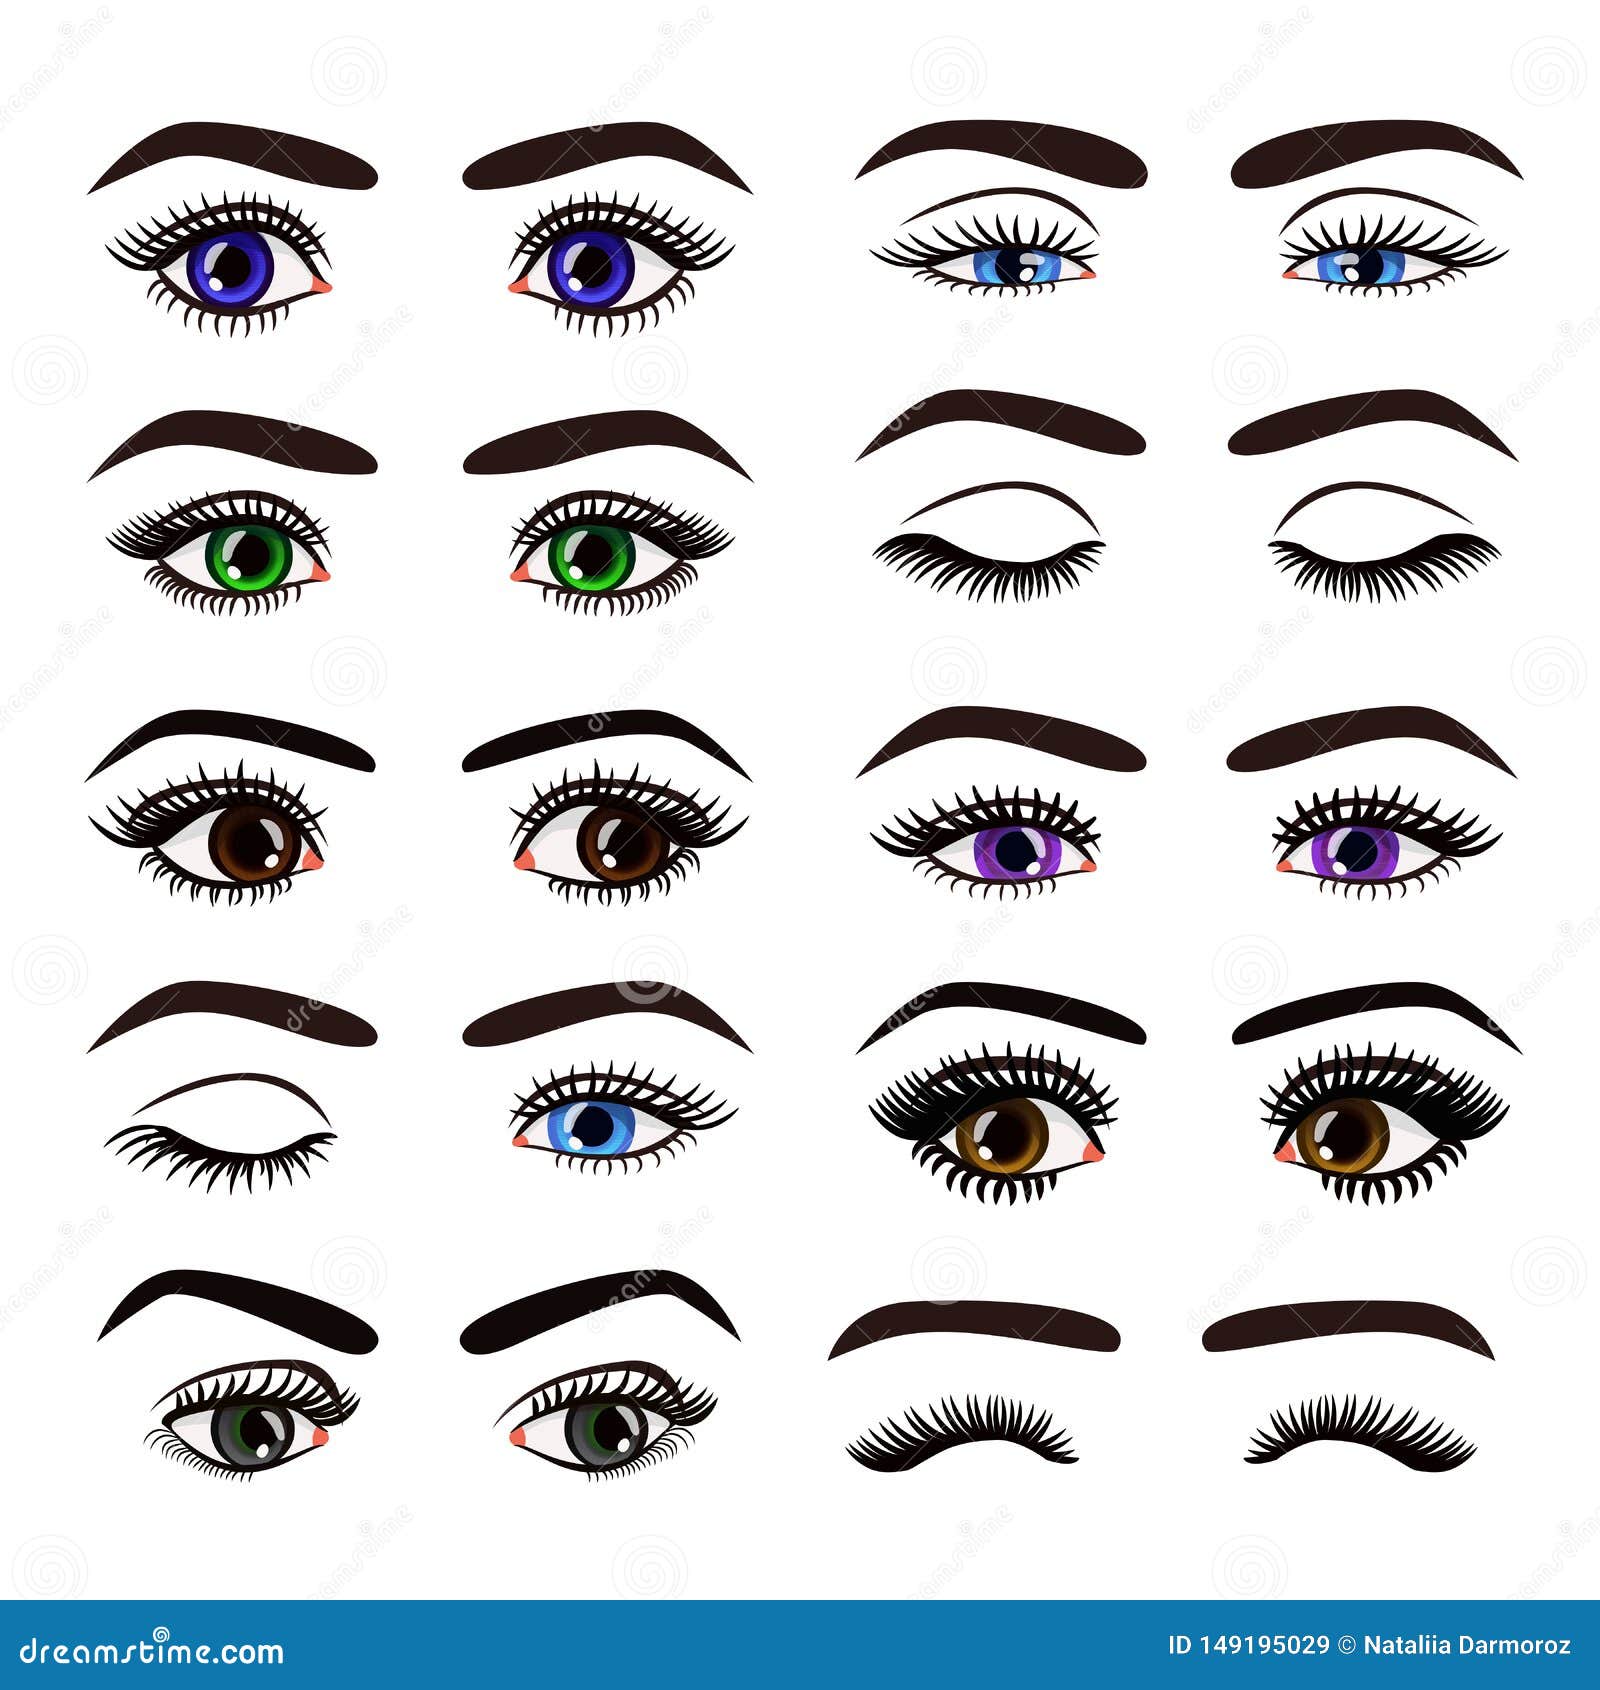   of beautiful female woman eyes and brows in different emotions set collection on white background.